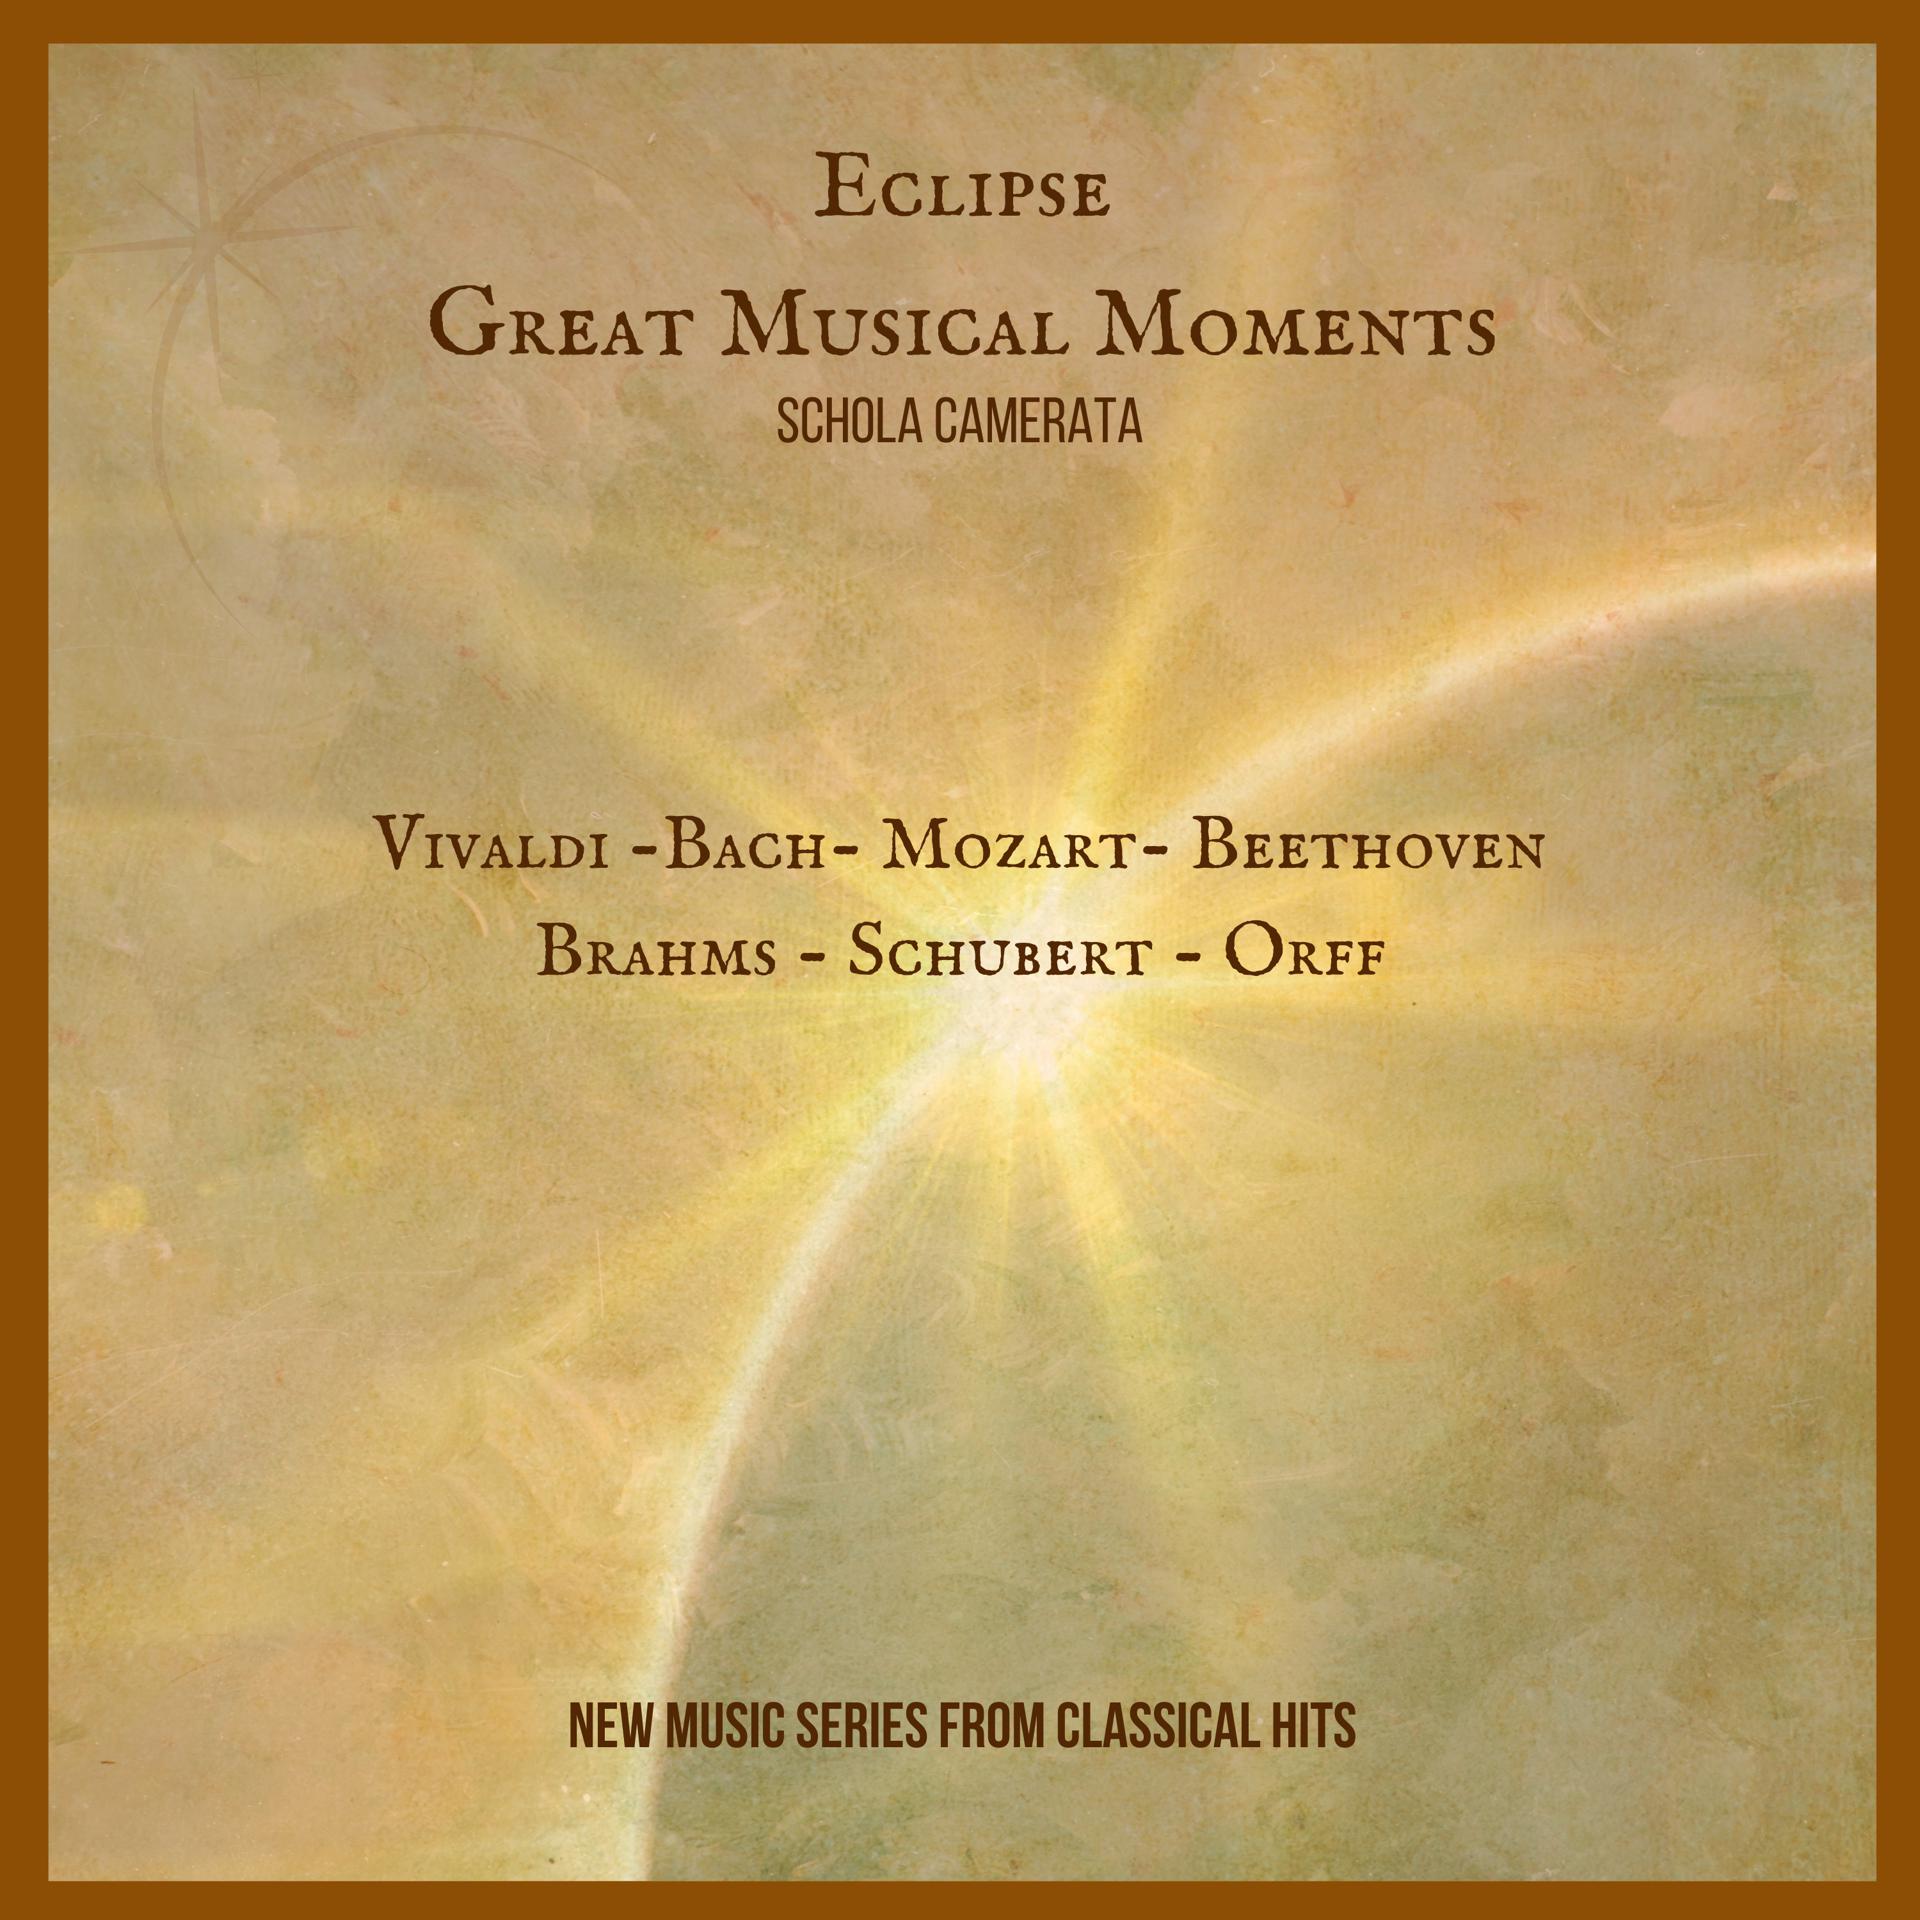 Постер альбома Eclipse Great Musical Moments - Schola Camerata. - Vivaldi - Bach - Mozart - Beethoven - Brahms - Schubert - Orff. - New Music Series from Classical Hits